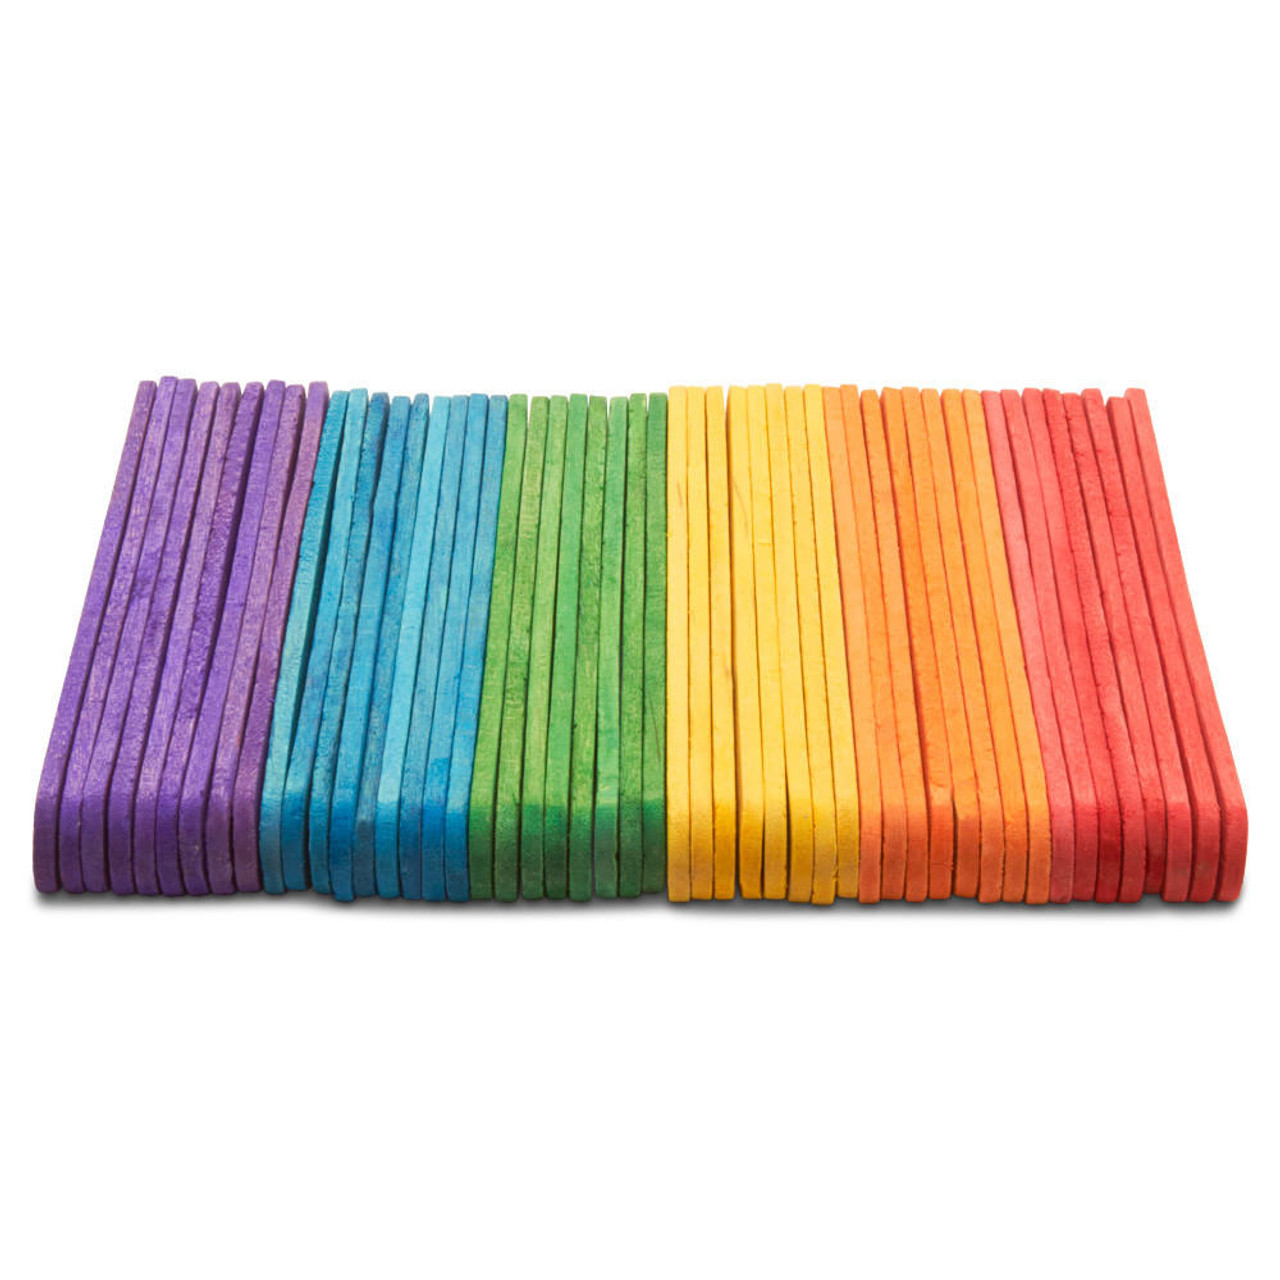 4-1/2 Colored Wooden Popsicle Sticks, Variety Pack Of 100